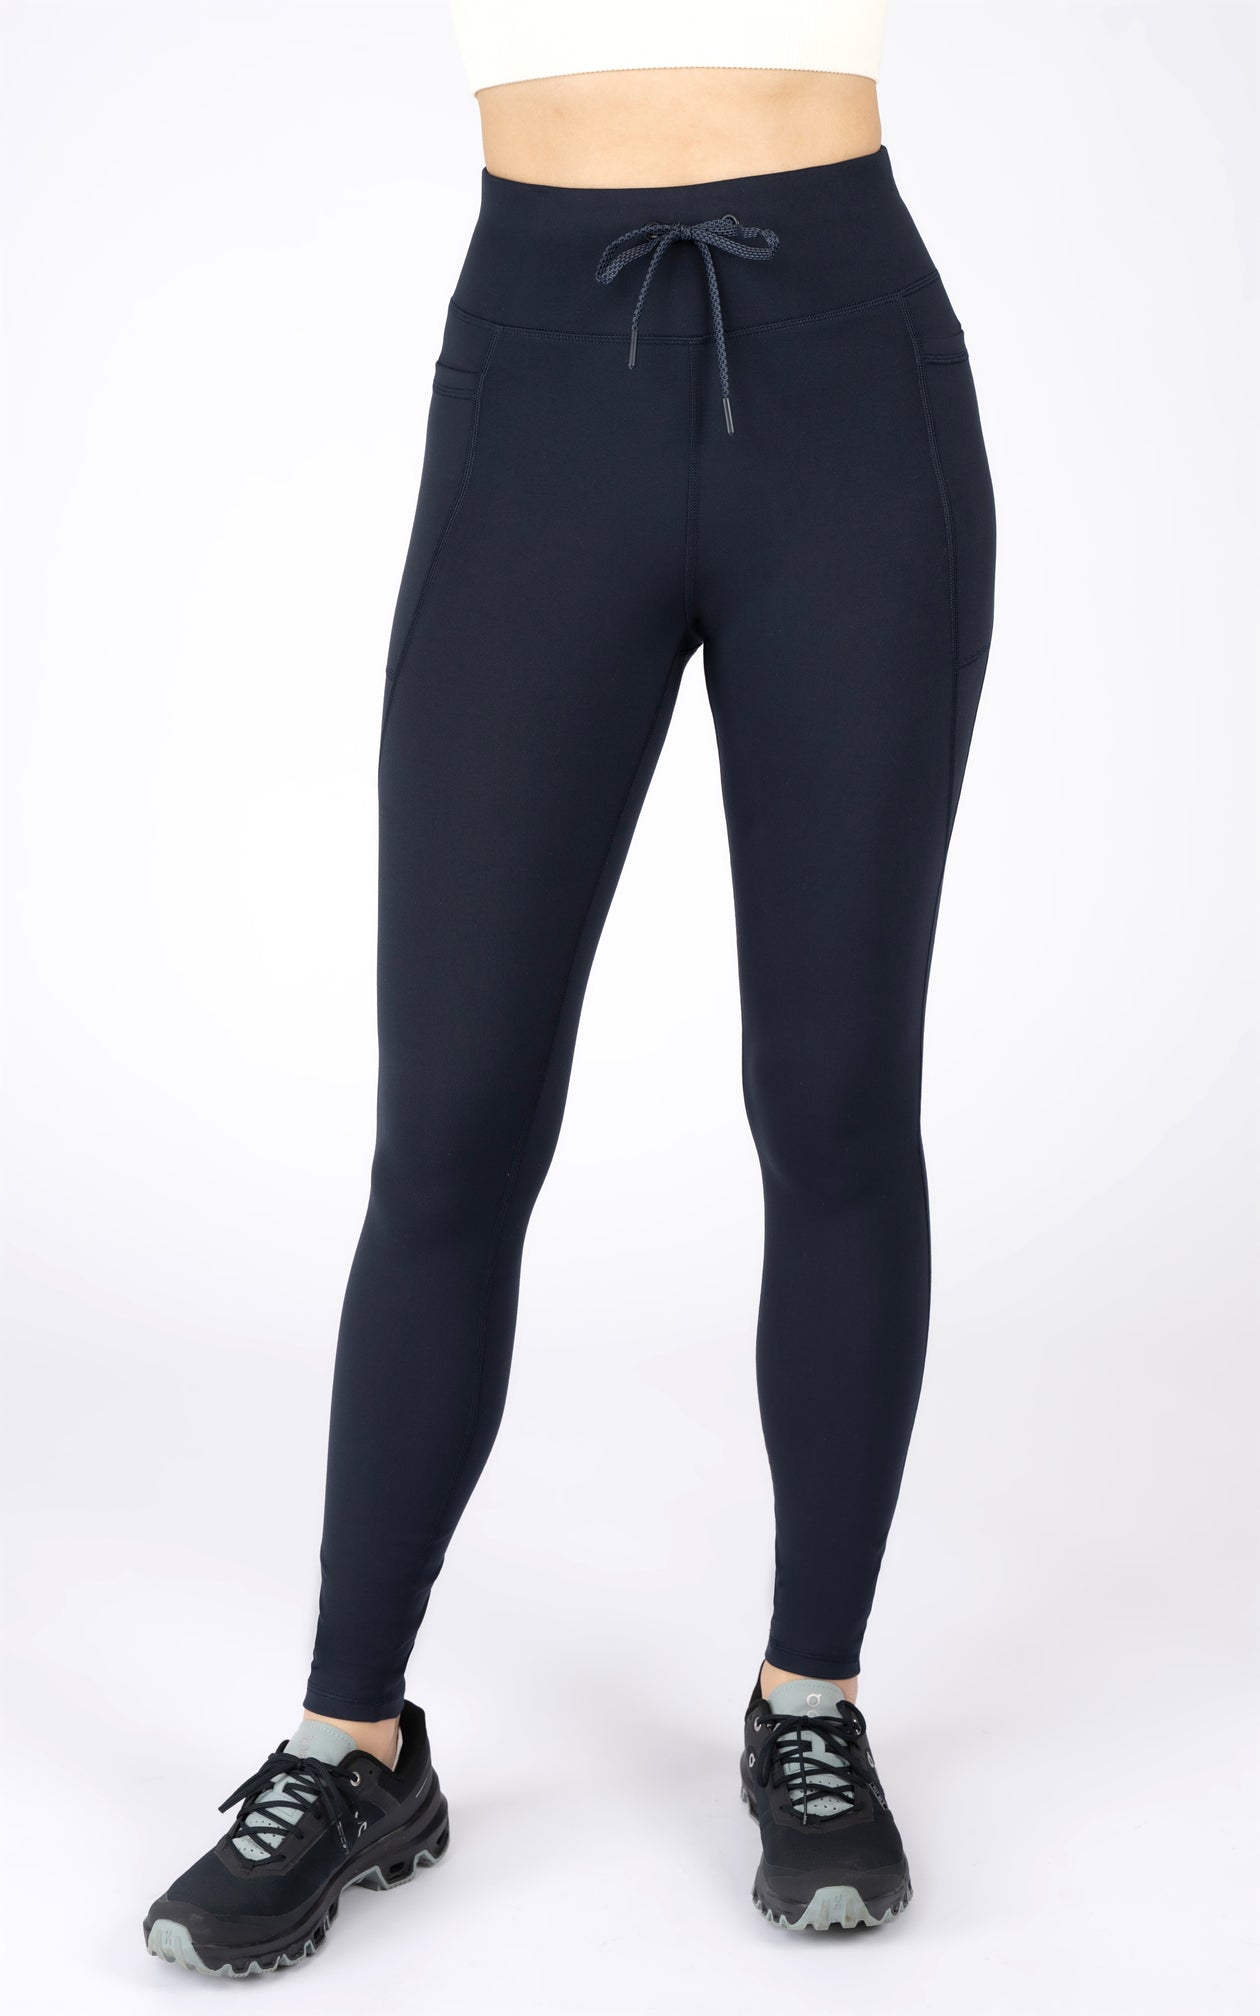 Cool Wholesale wholesale polyester spandex leggings In Any Size And Style 